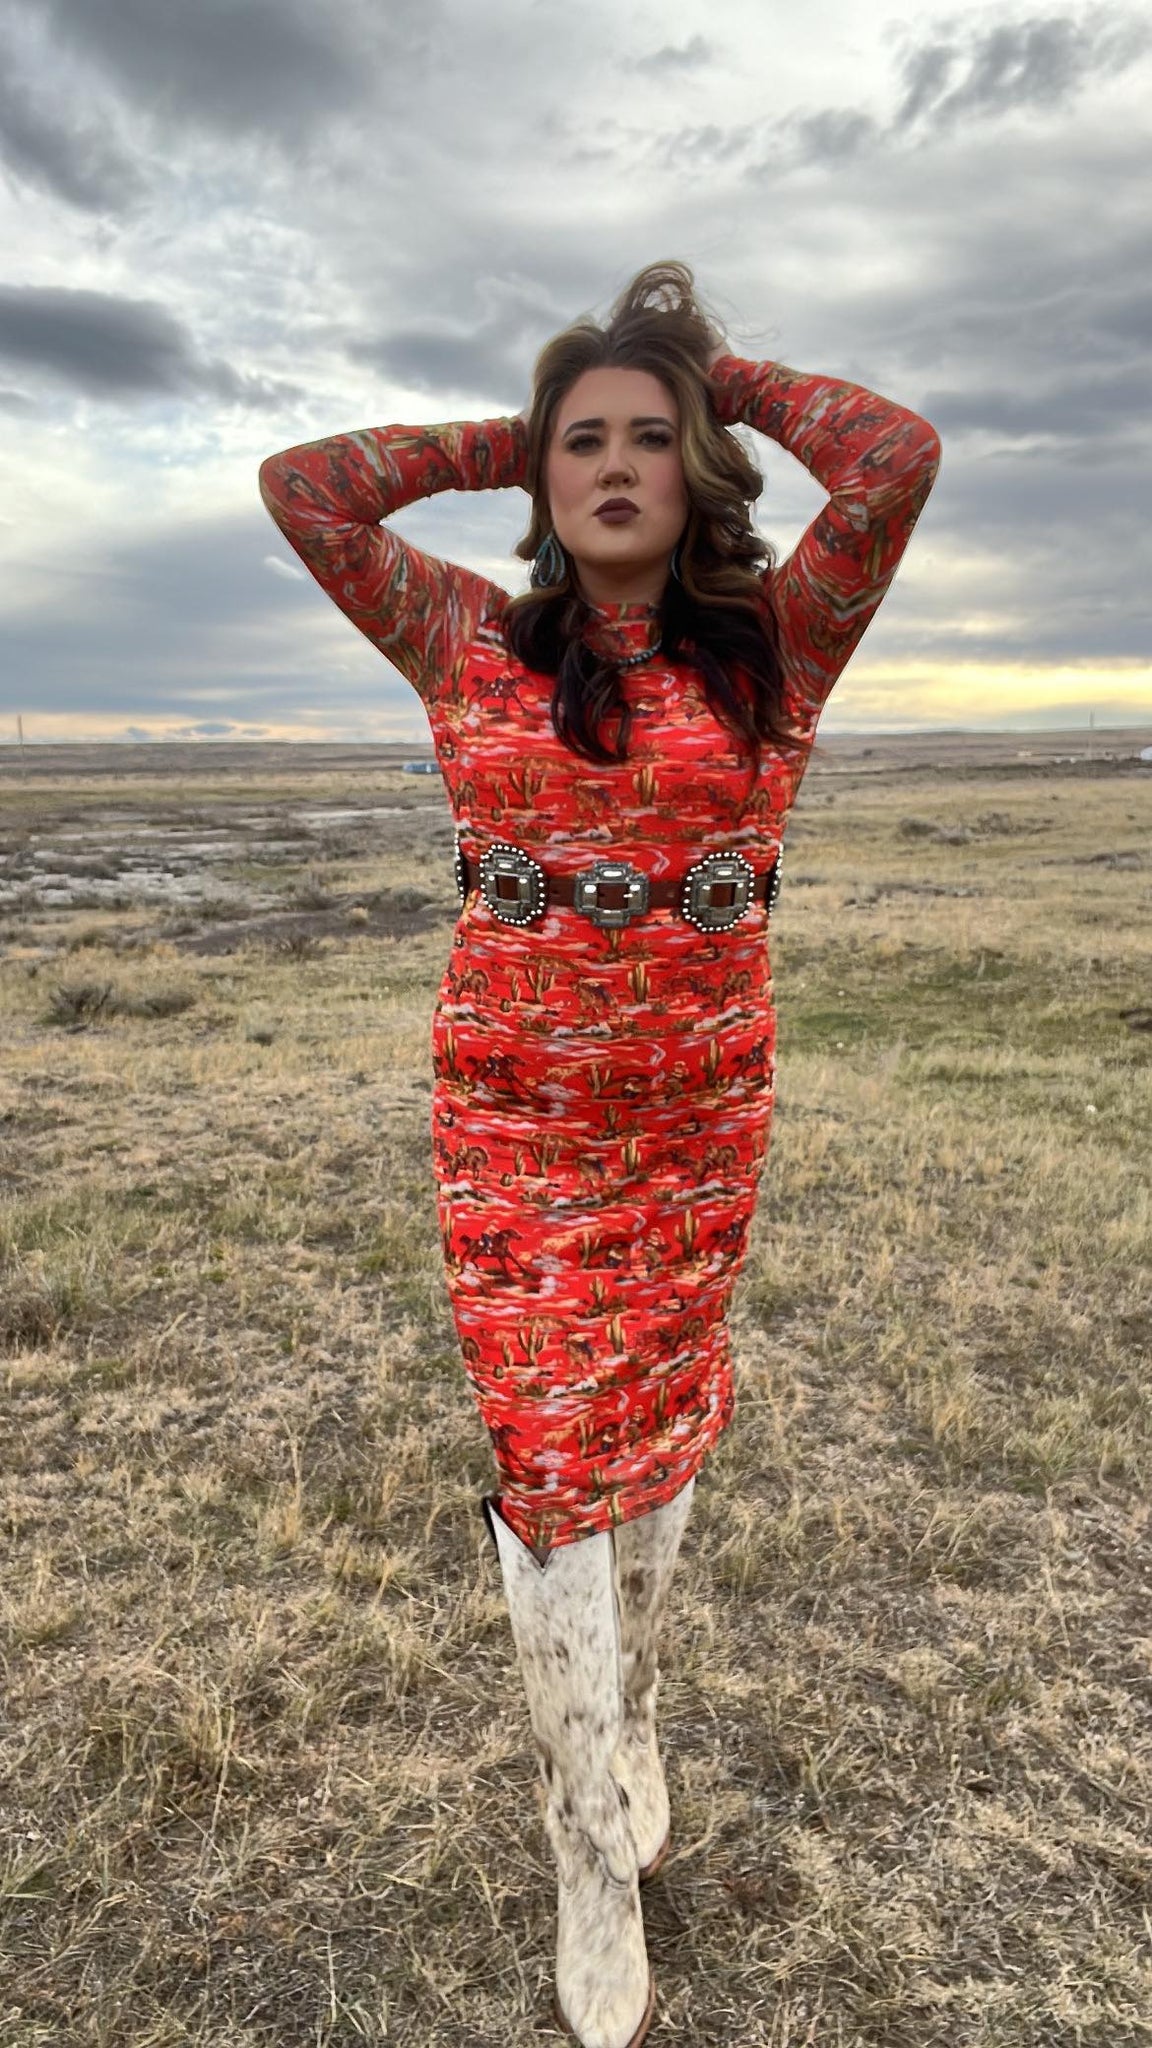 The Western Cowboy Red Dress